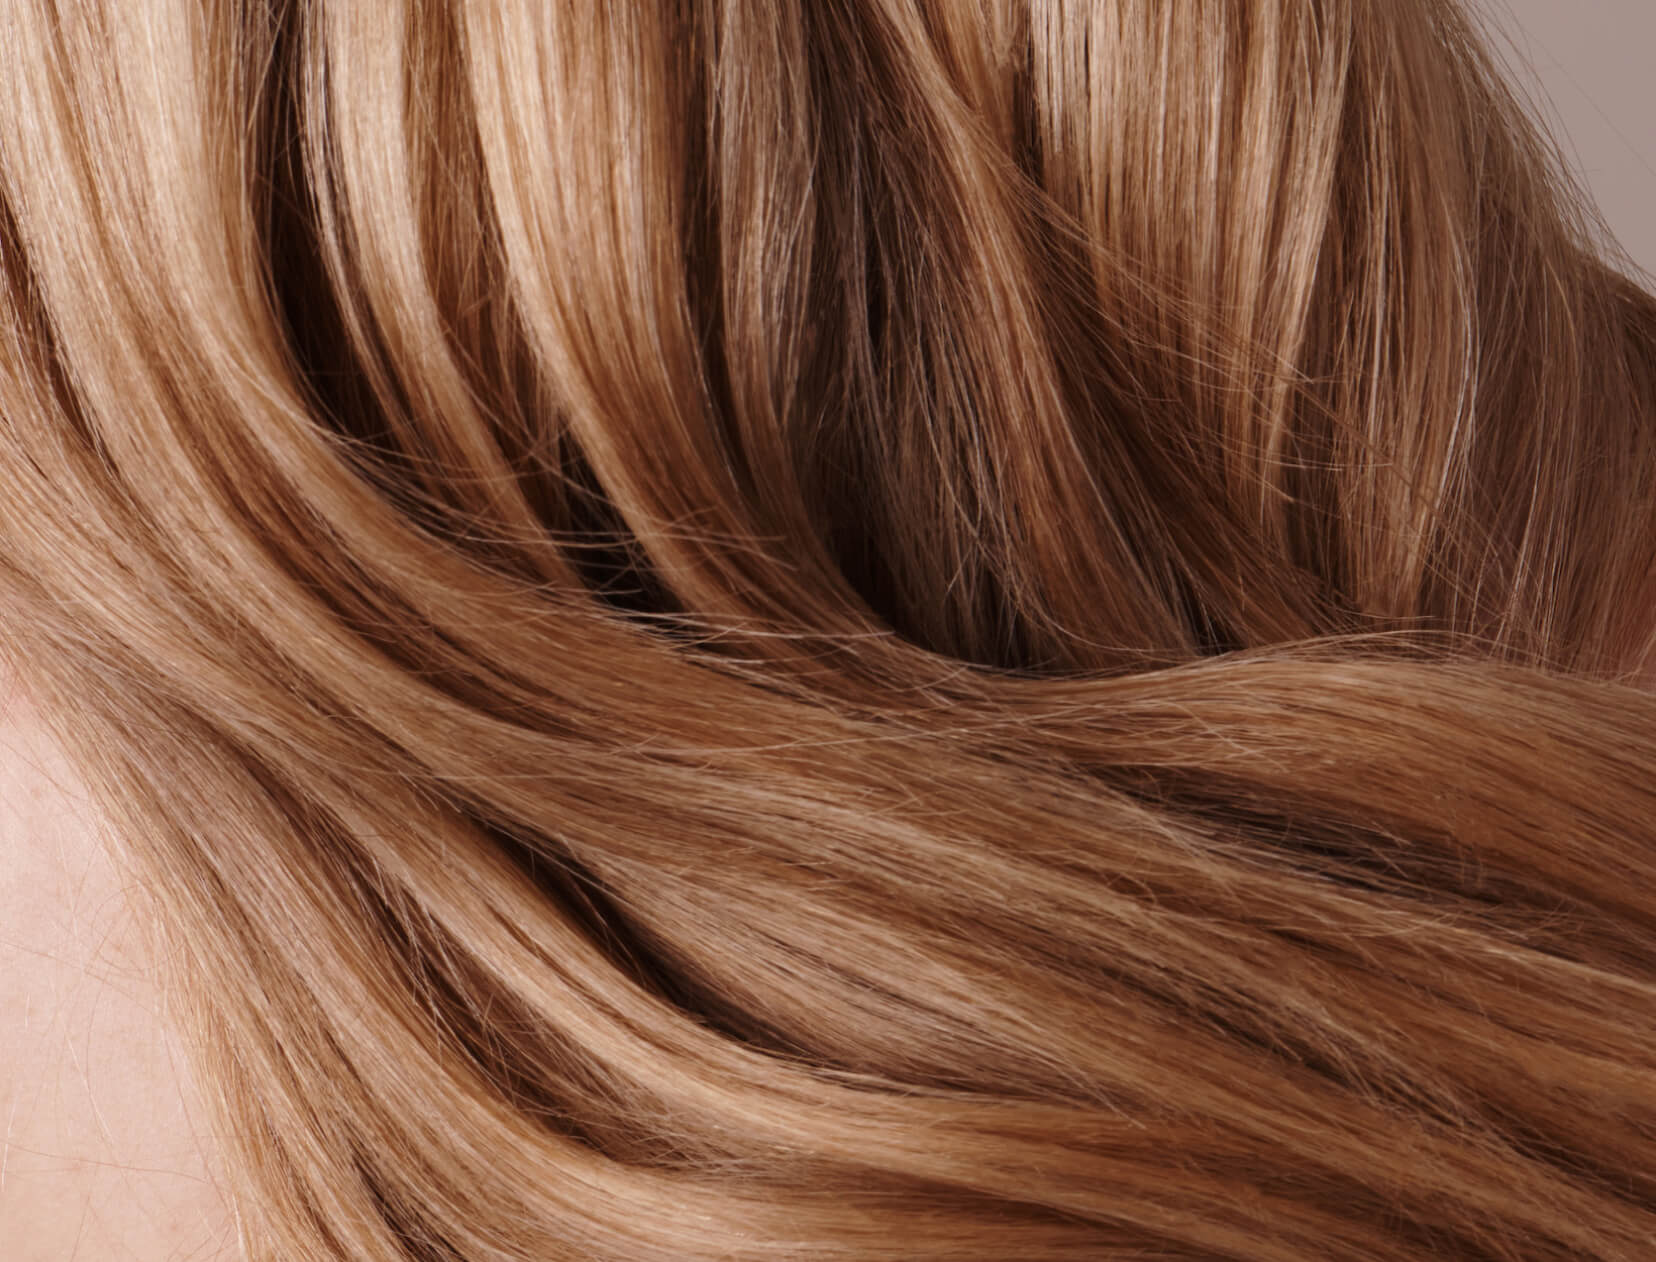 Key Vitamins and Minerals for Healthy Hair Growth | goop